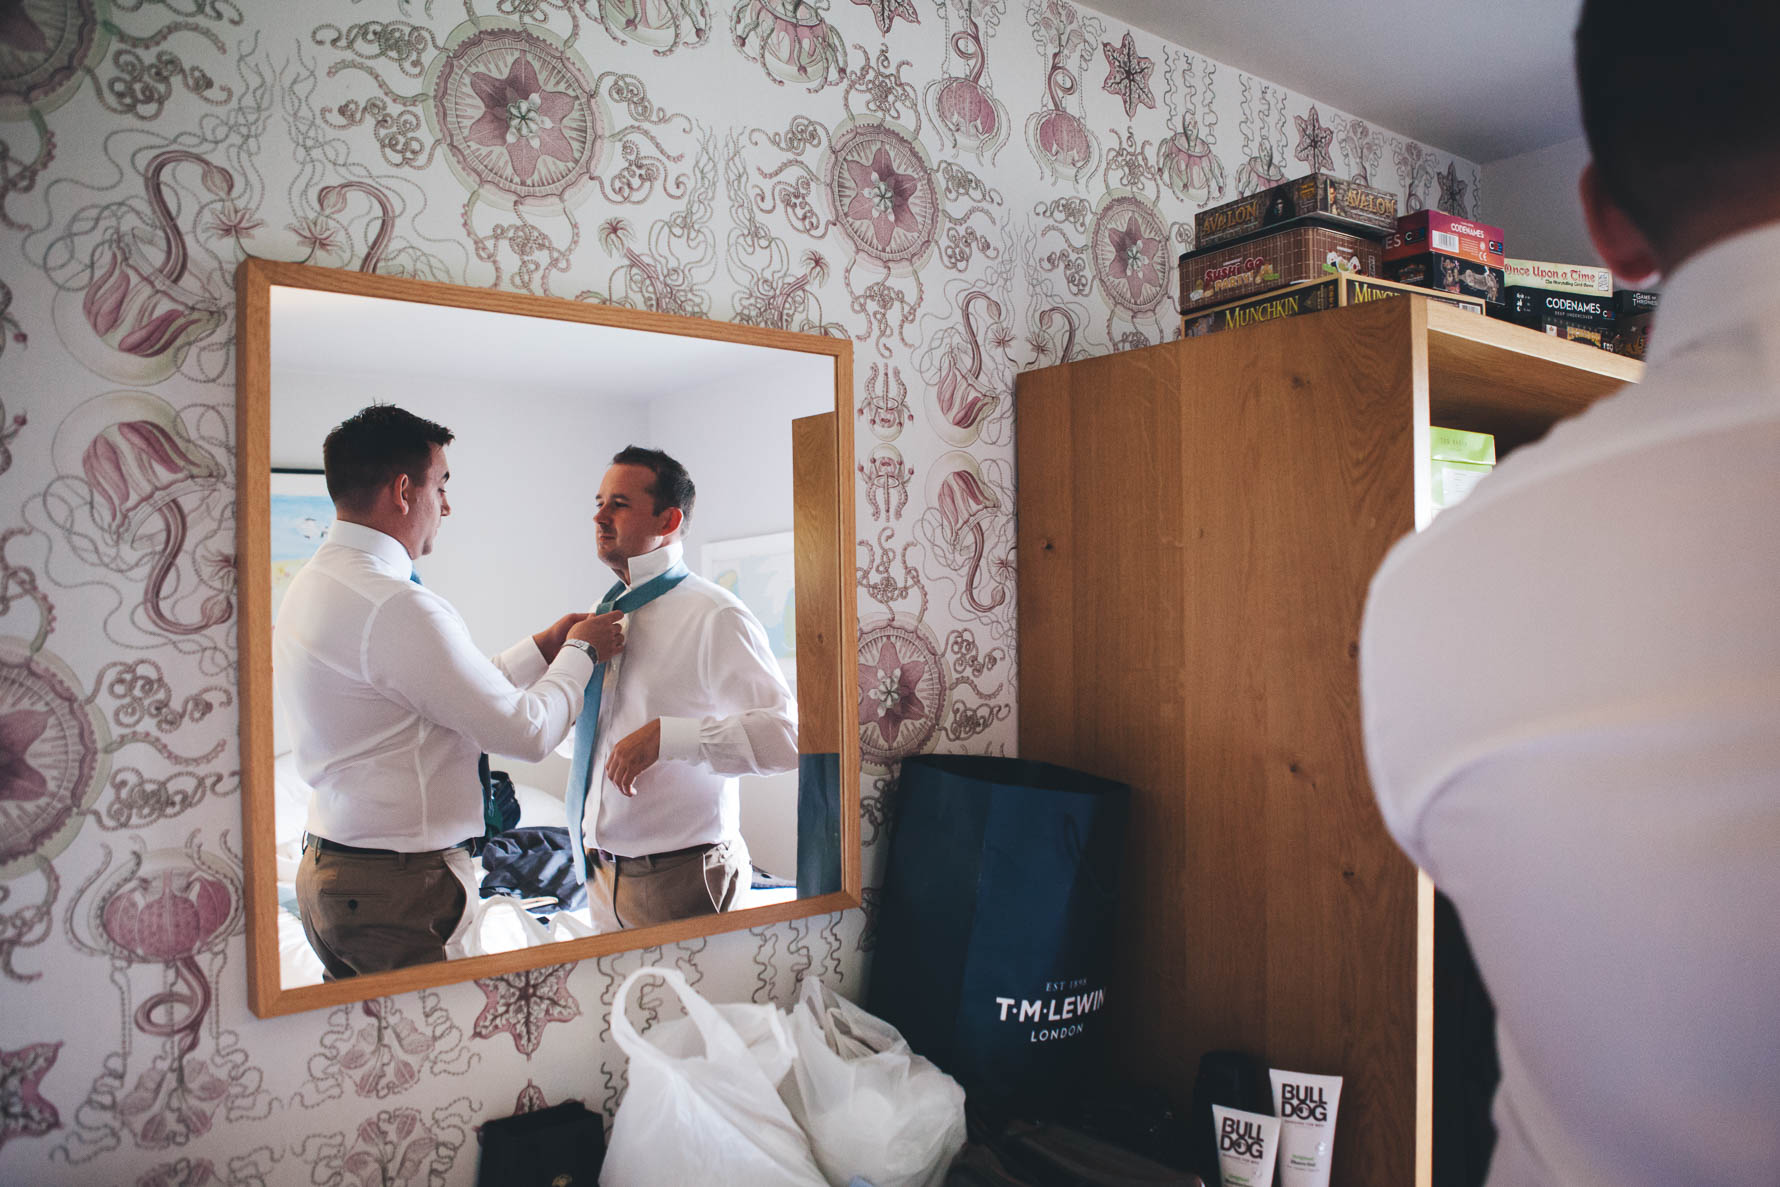 View of the mirror in a bedroom of the best man helping the groom put on his turquoise tie. Both men are wearing white shirts and chinos